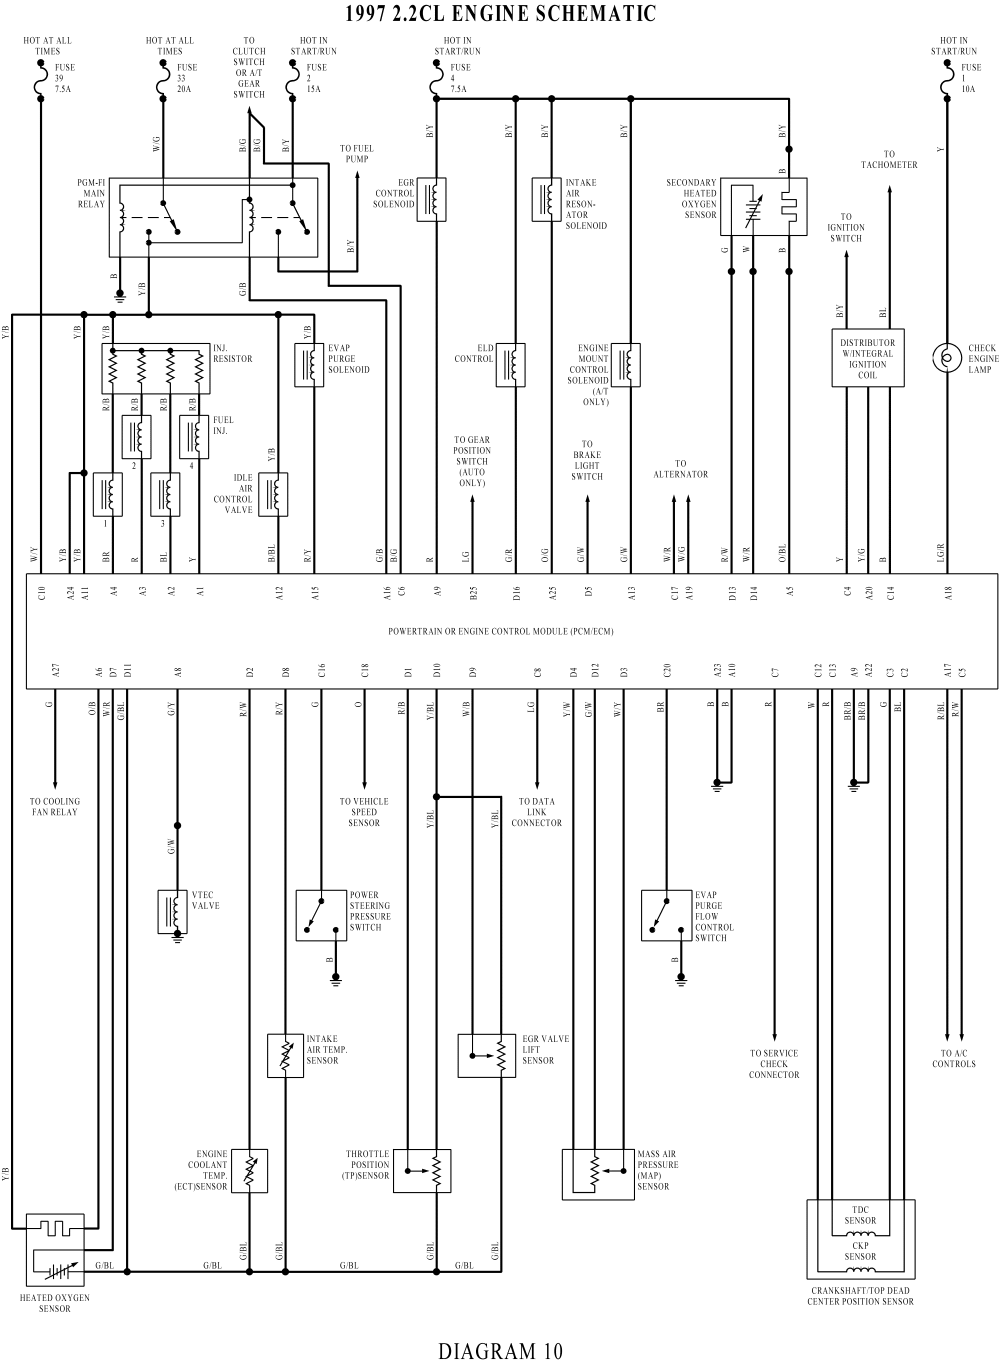 wiringdiagrams: Engine Schematic wiring diagram for 1997 Acura 2.2CL?